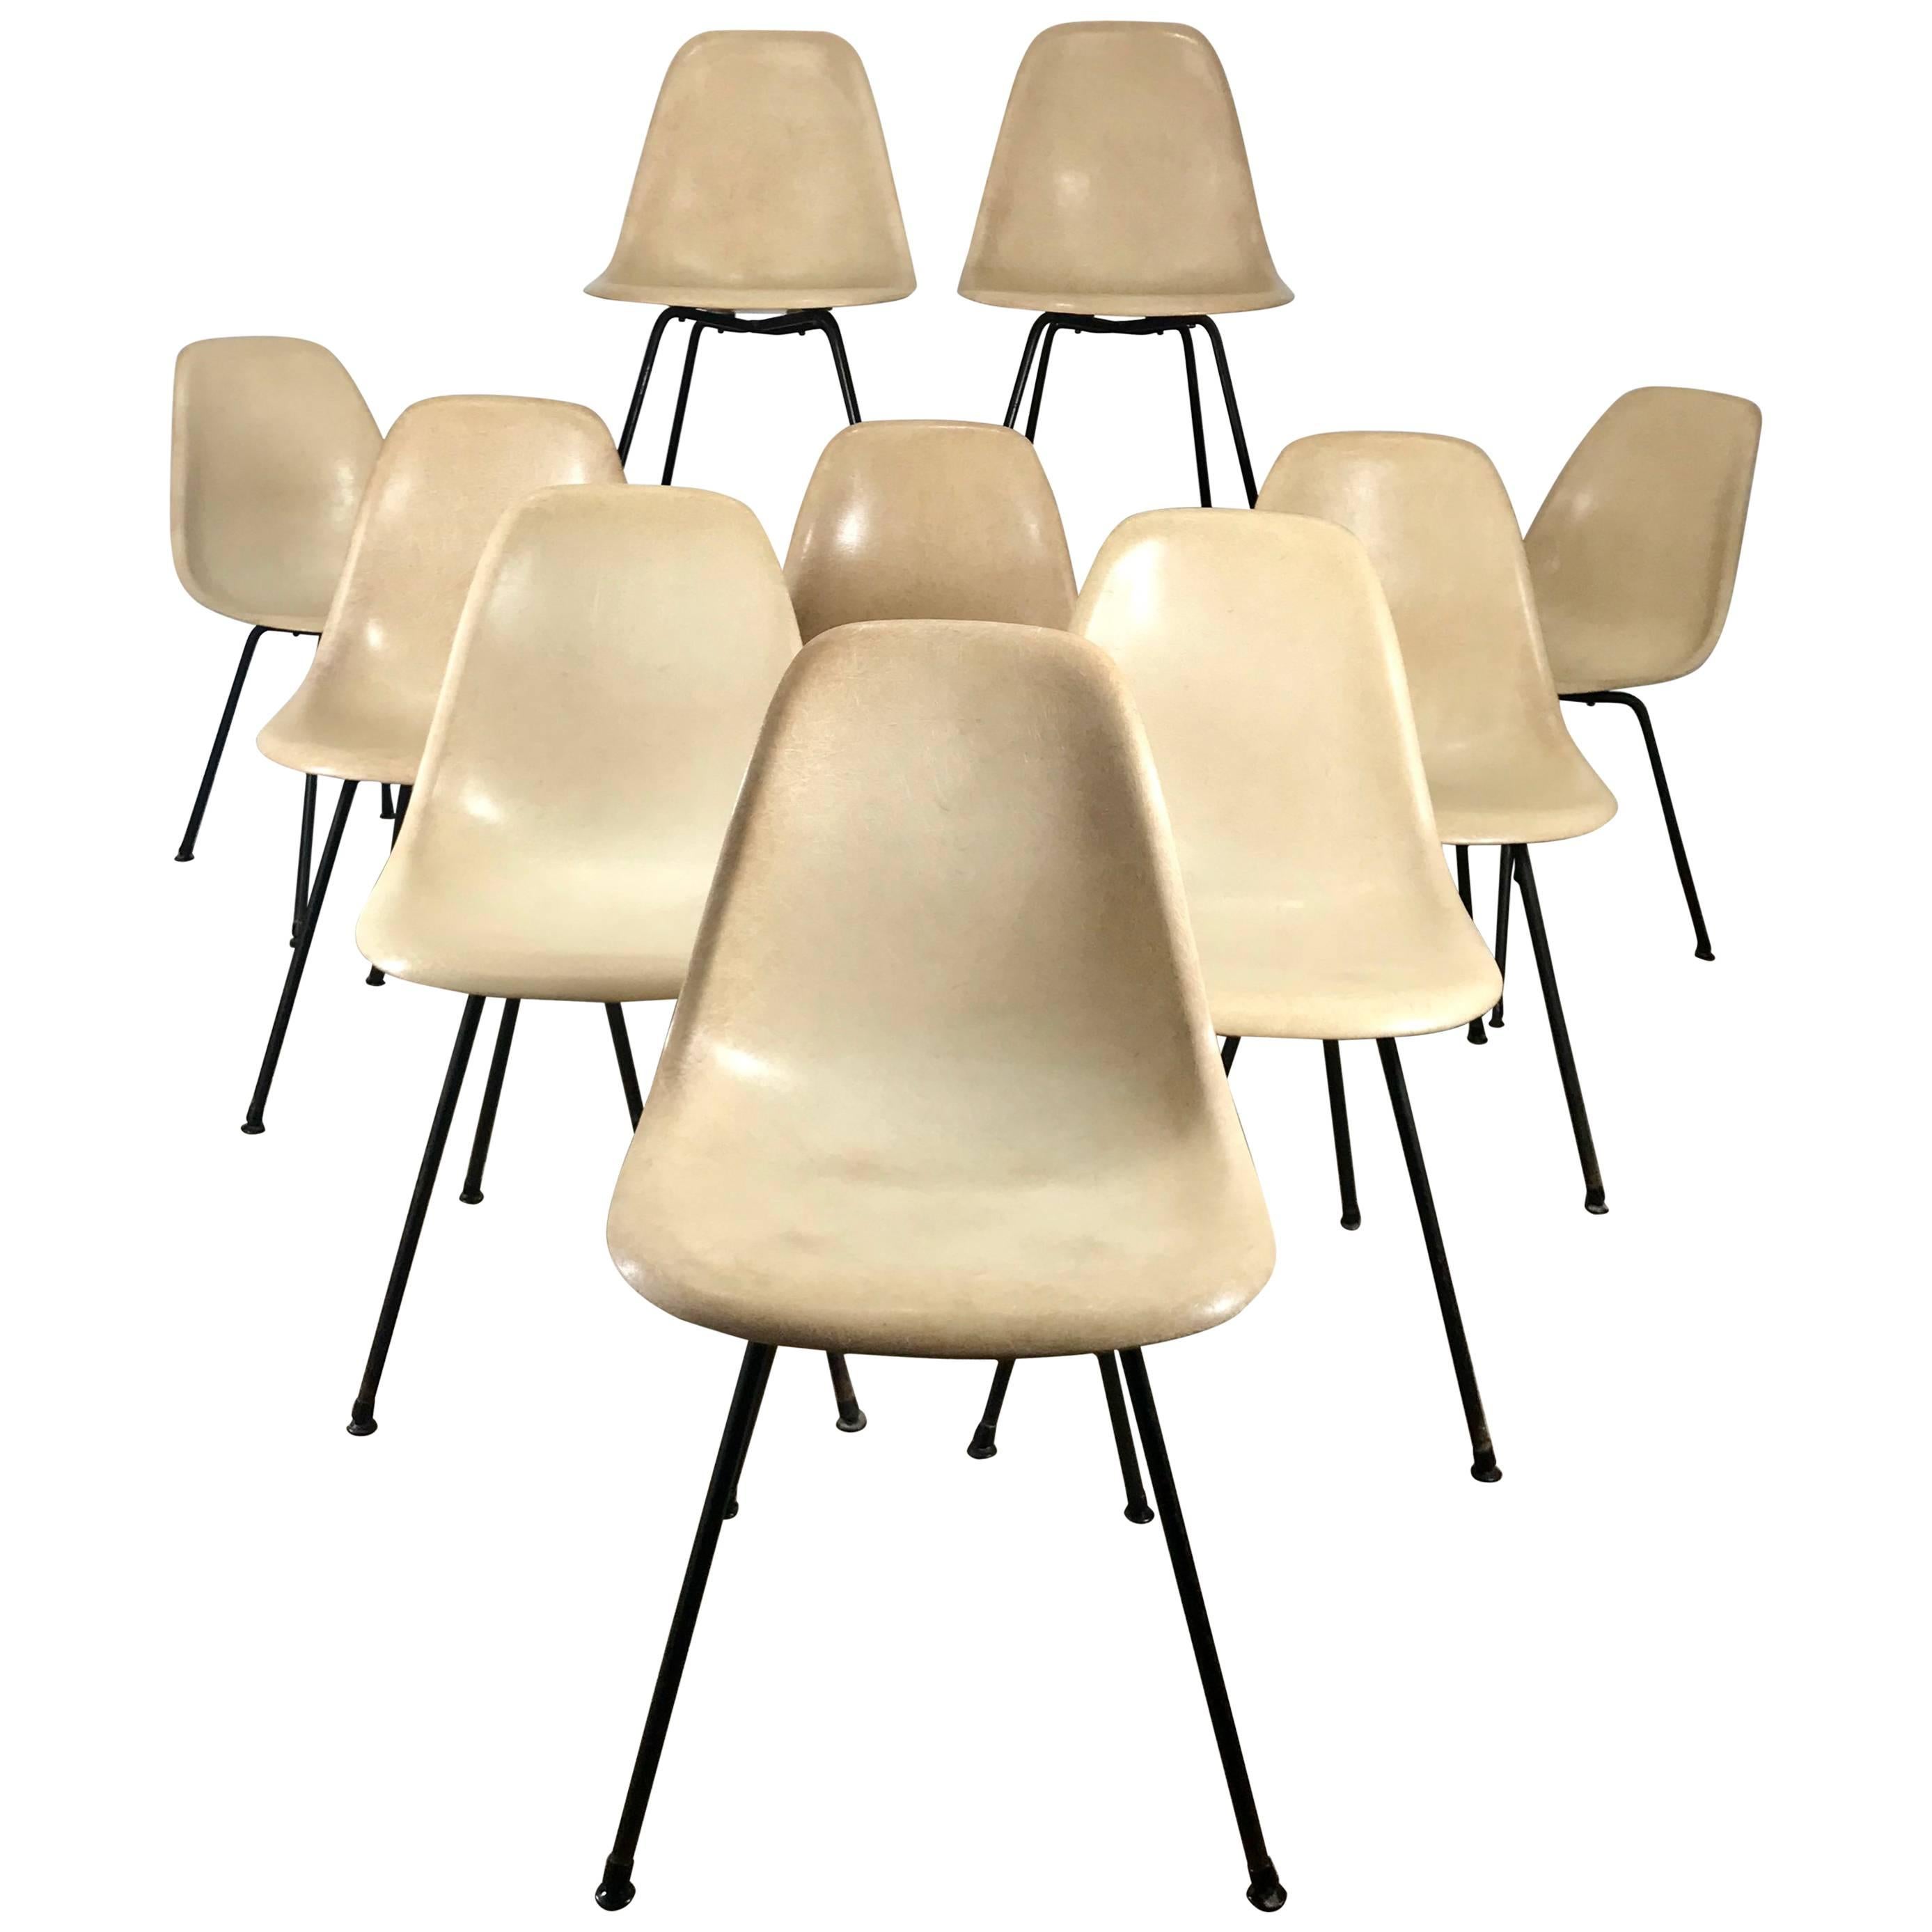 Rare 1st year production Eames Fiberglass Side Shell Chairs, Set of Ten, X-Base